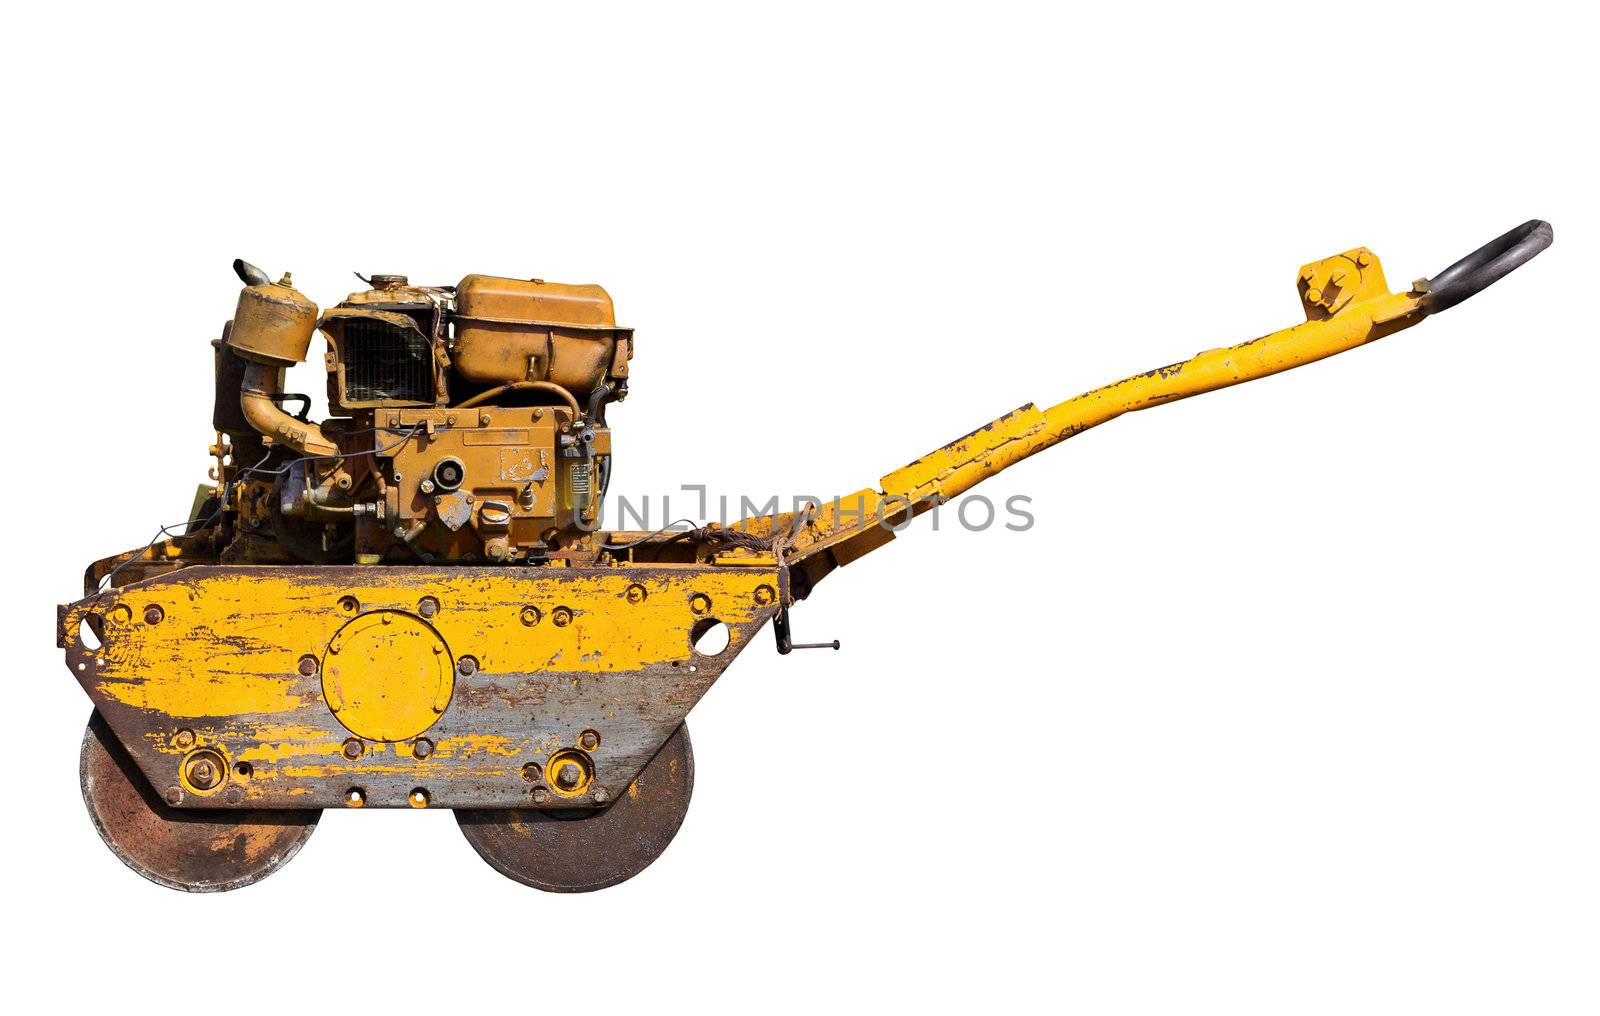 Old mini road roller for laying asphalt by pzaxe